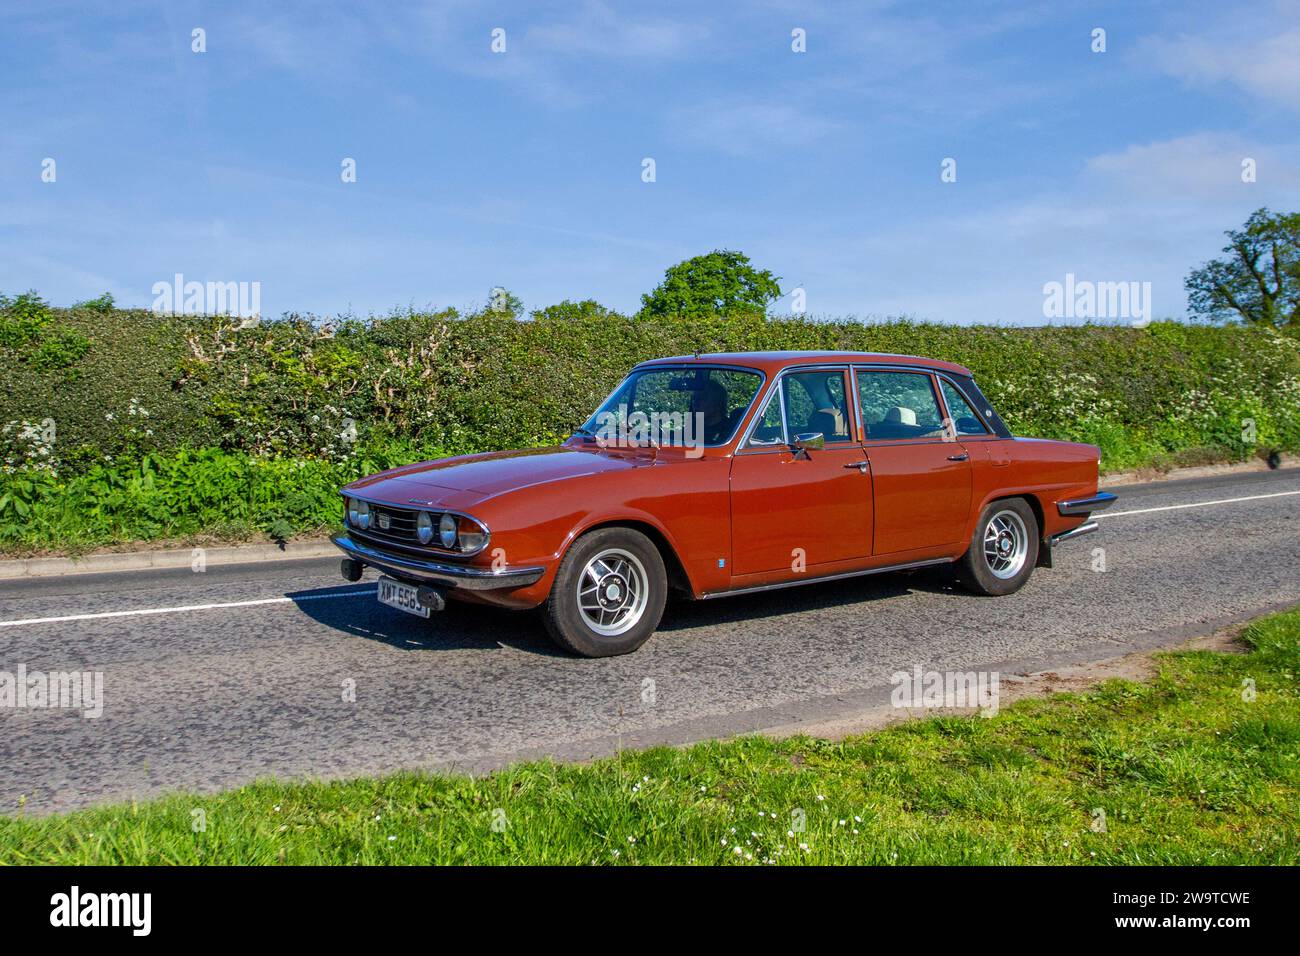 1972 1970s 70s seventies  Russet Brown 2000 Mk 2 4-door saloon; Vintage restored classic specialist motors vehicle restoration, automobile collectors, yesteryear motoring enthusiasts and historic veteran cars travelling in Cheshire, UK Stock Photo